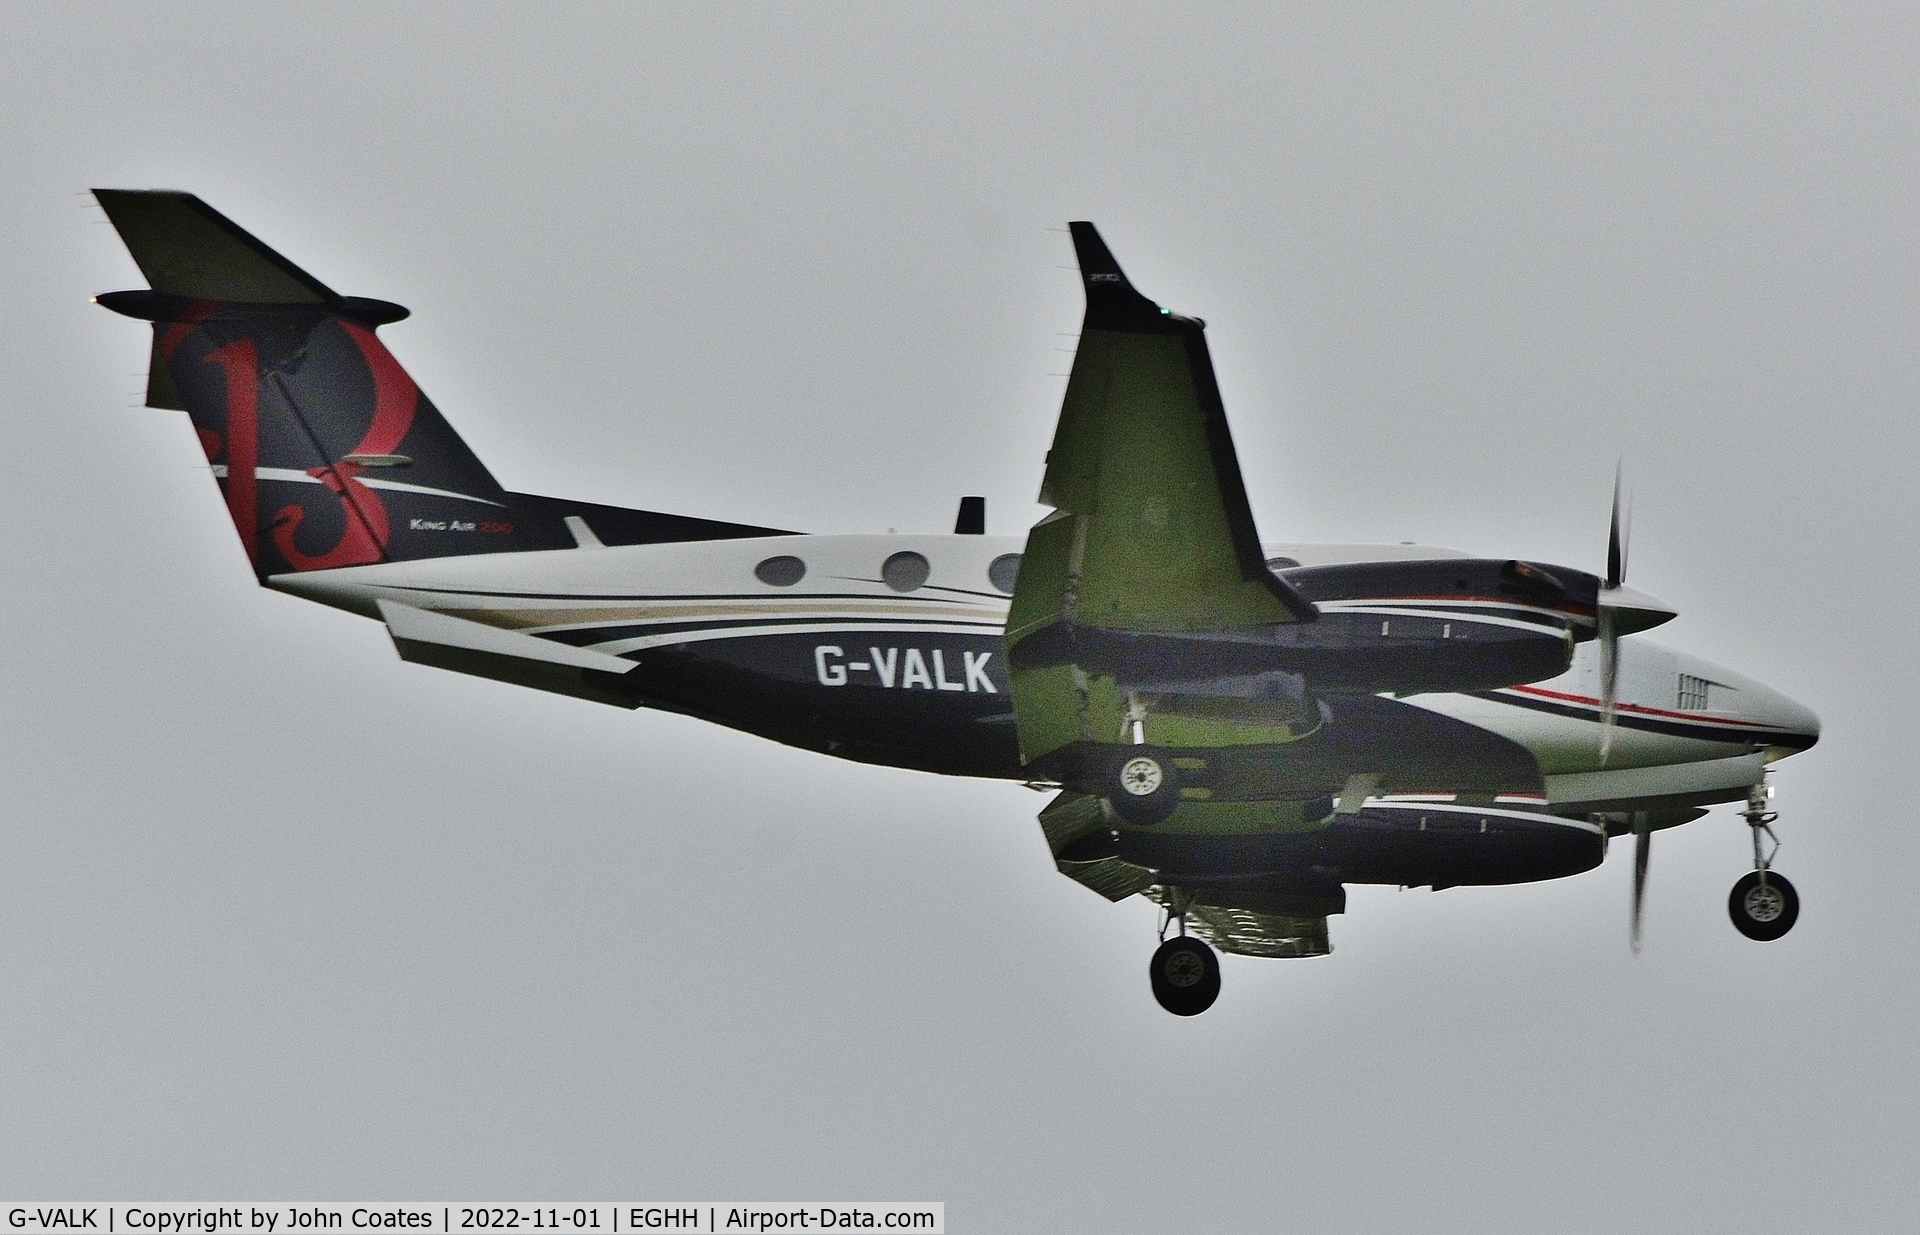 G-VALK, 1980 Beech 200 Super King Air C/N BB-684, Finals to 08 in bad weather